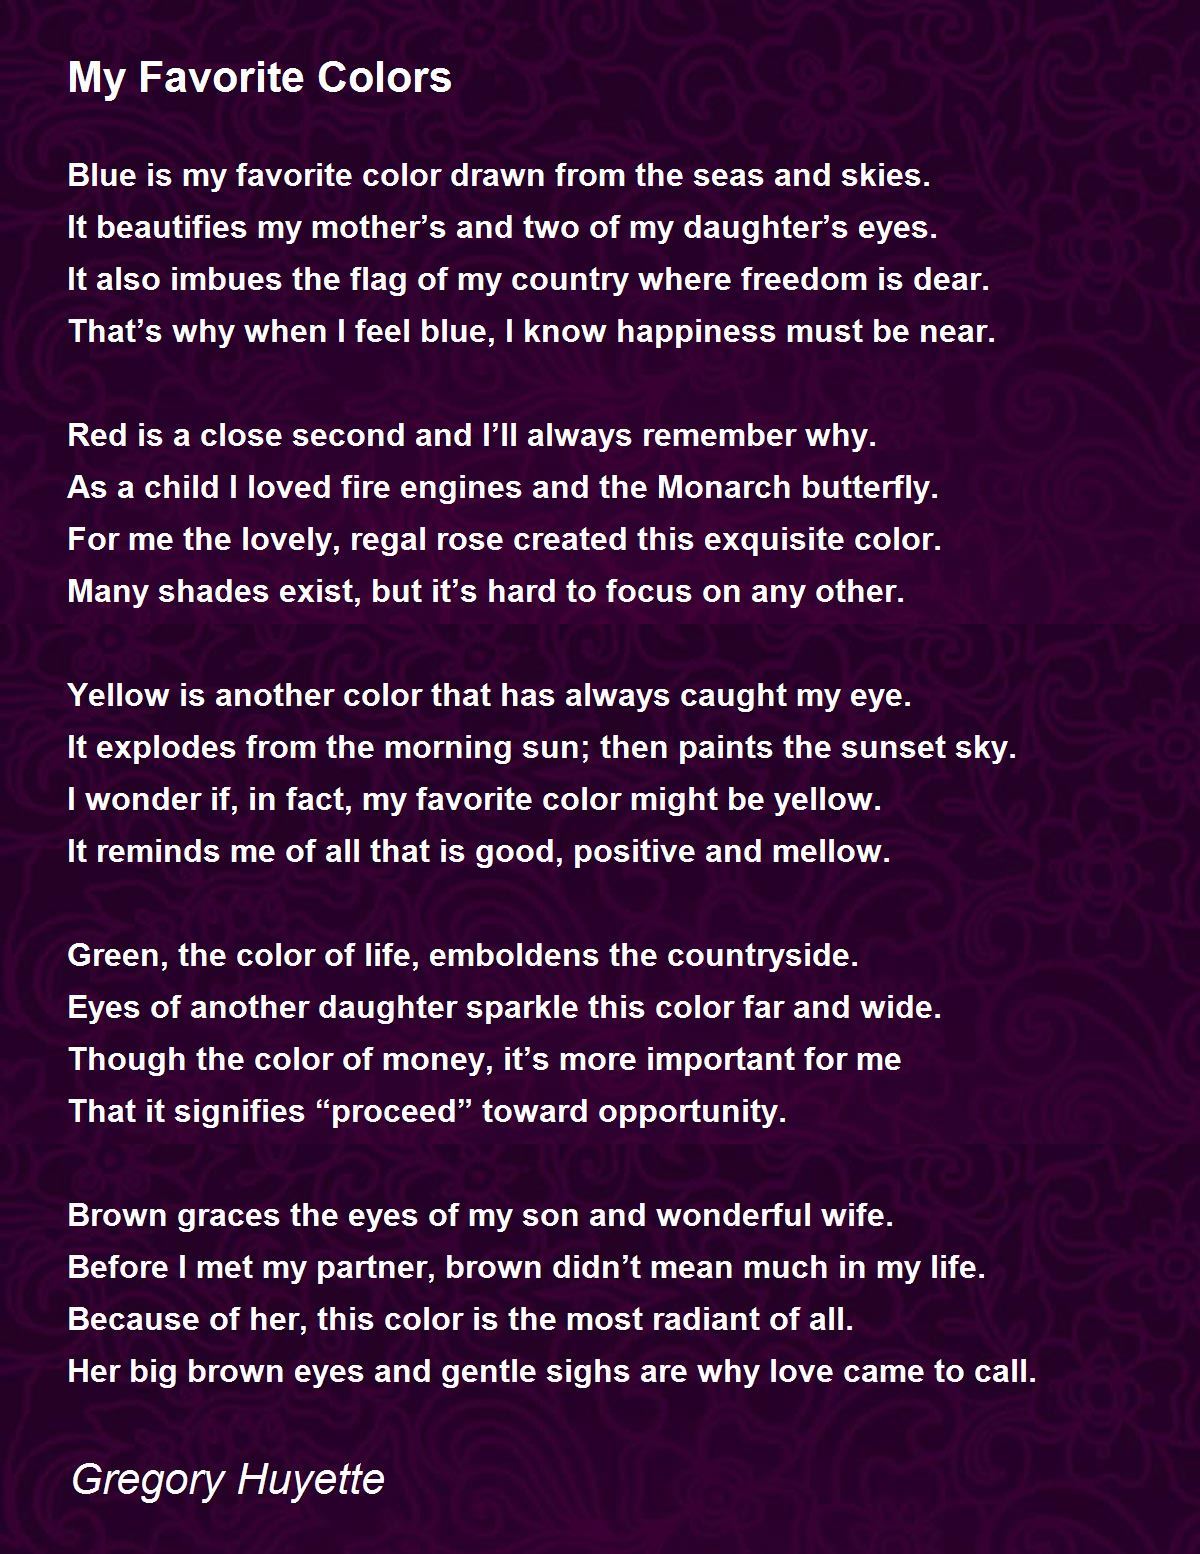 My Favorite Colors - My Favorite Colors Poem by Gregory Huyette